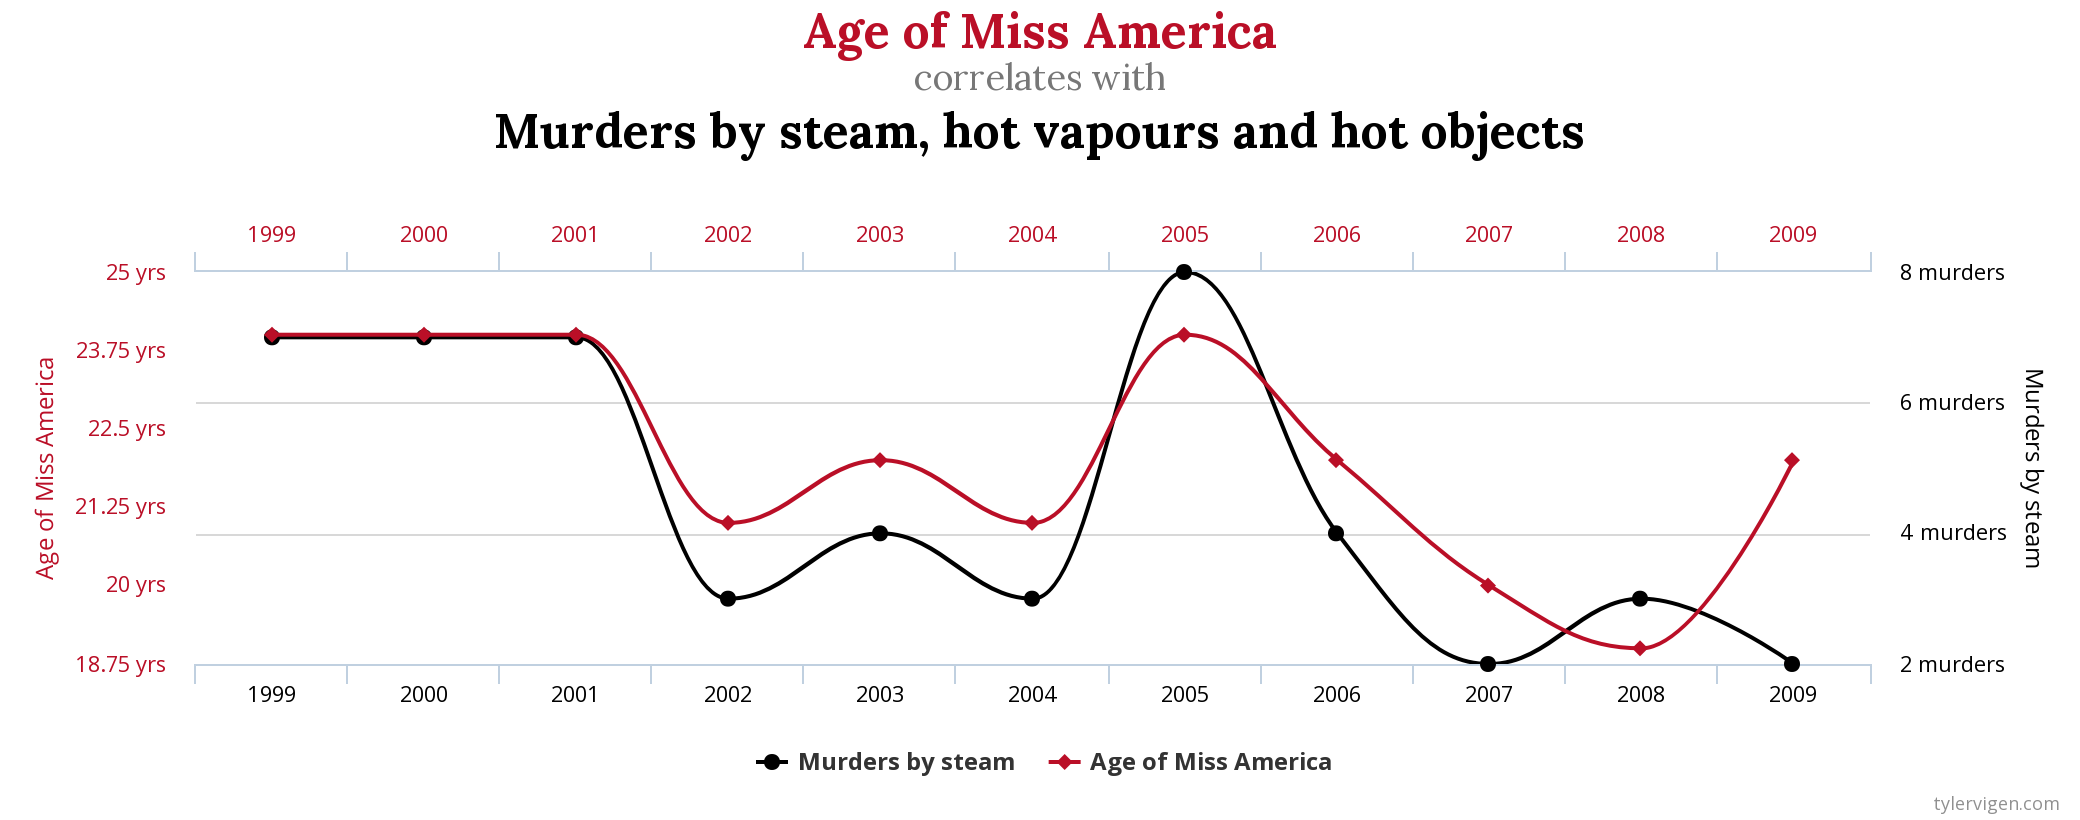 Example of a correlation discovered in a dataset with a very large set of variables. Source: http://www.tylervigen.com/spurious-correlations.